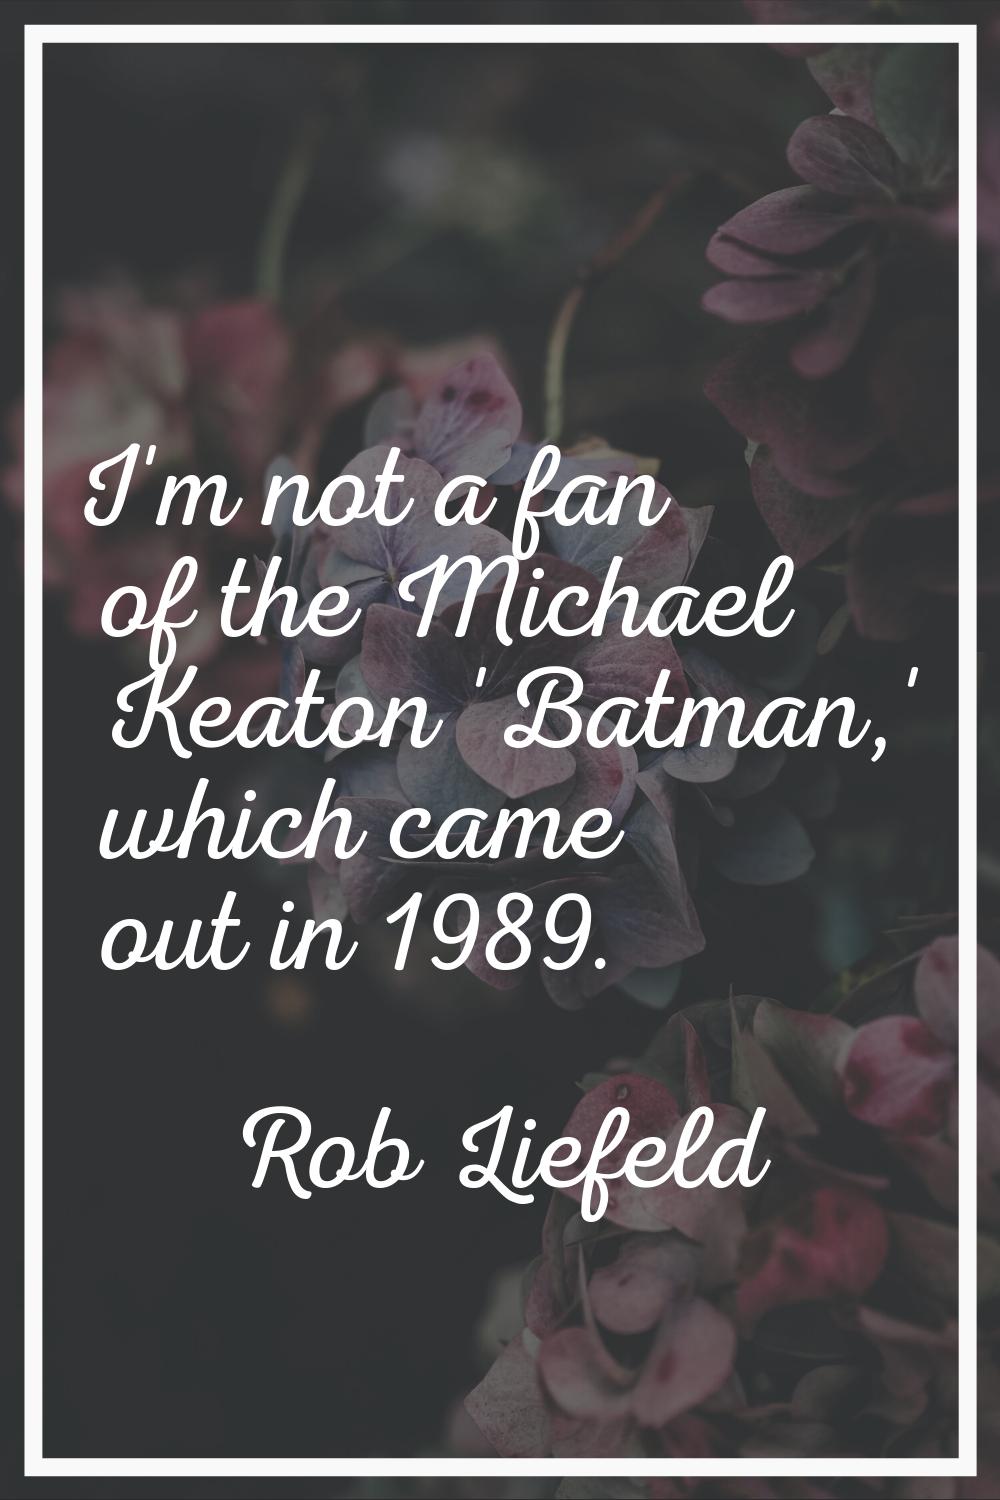 I'm not a fan of the Michael Keaton 'Batman,' which came out in 1989.